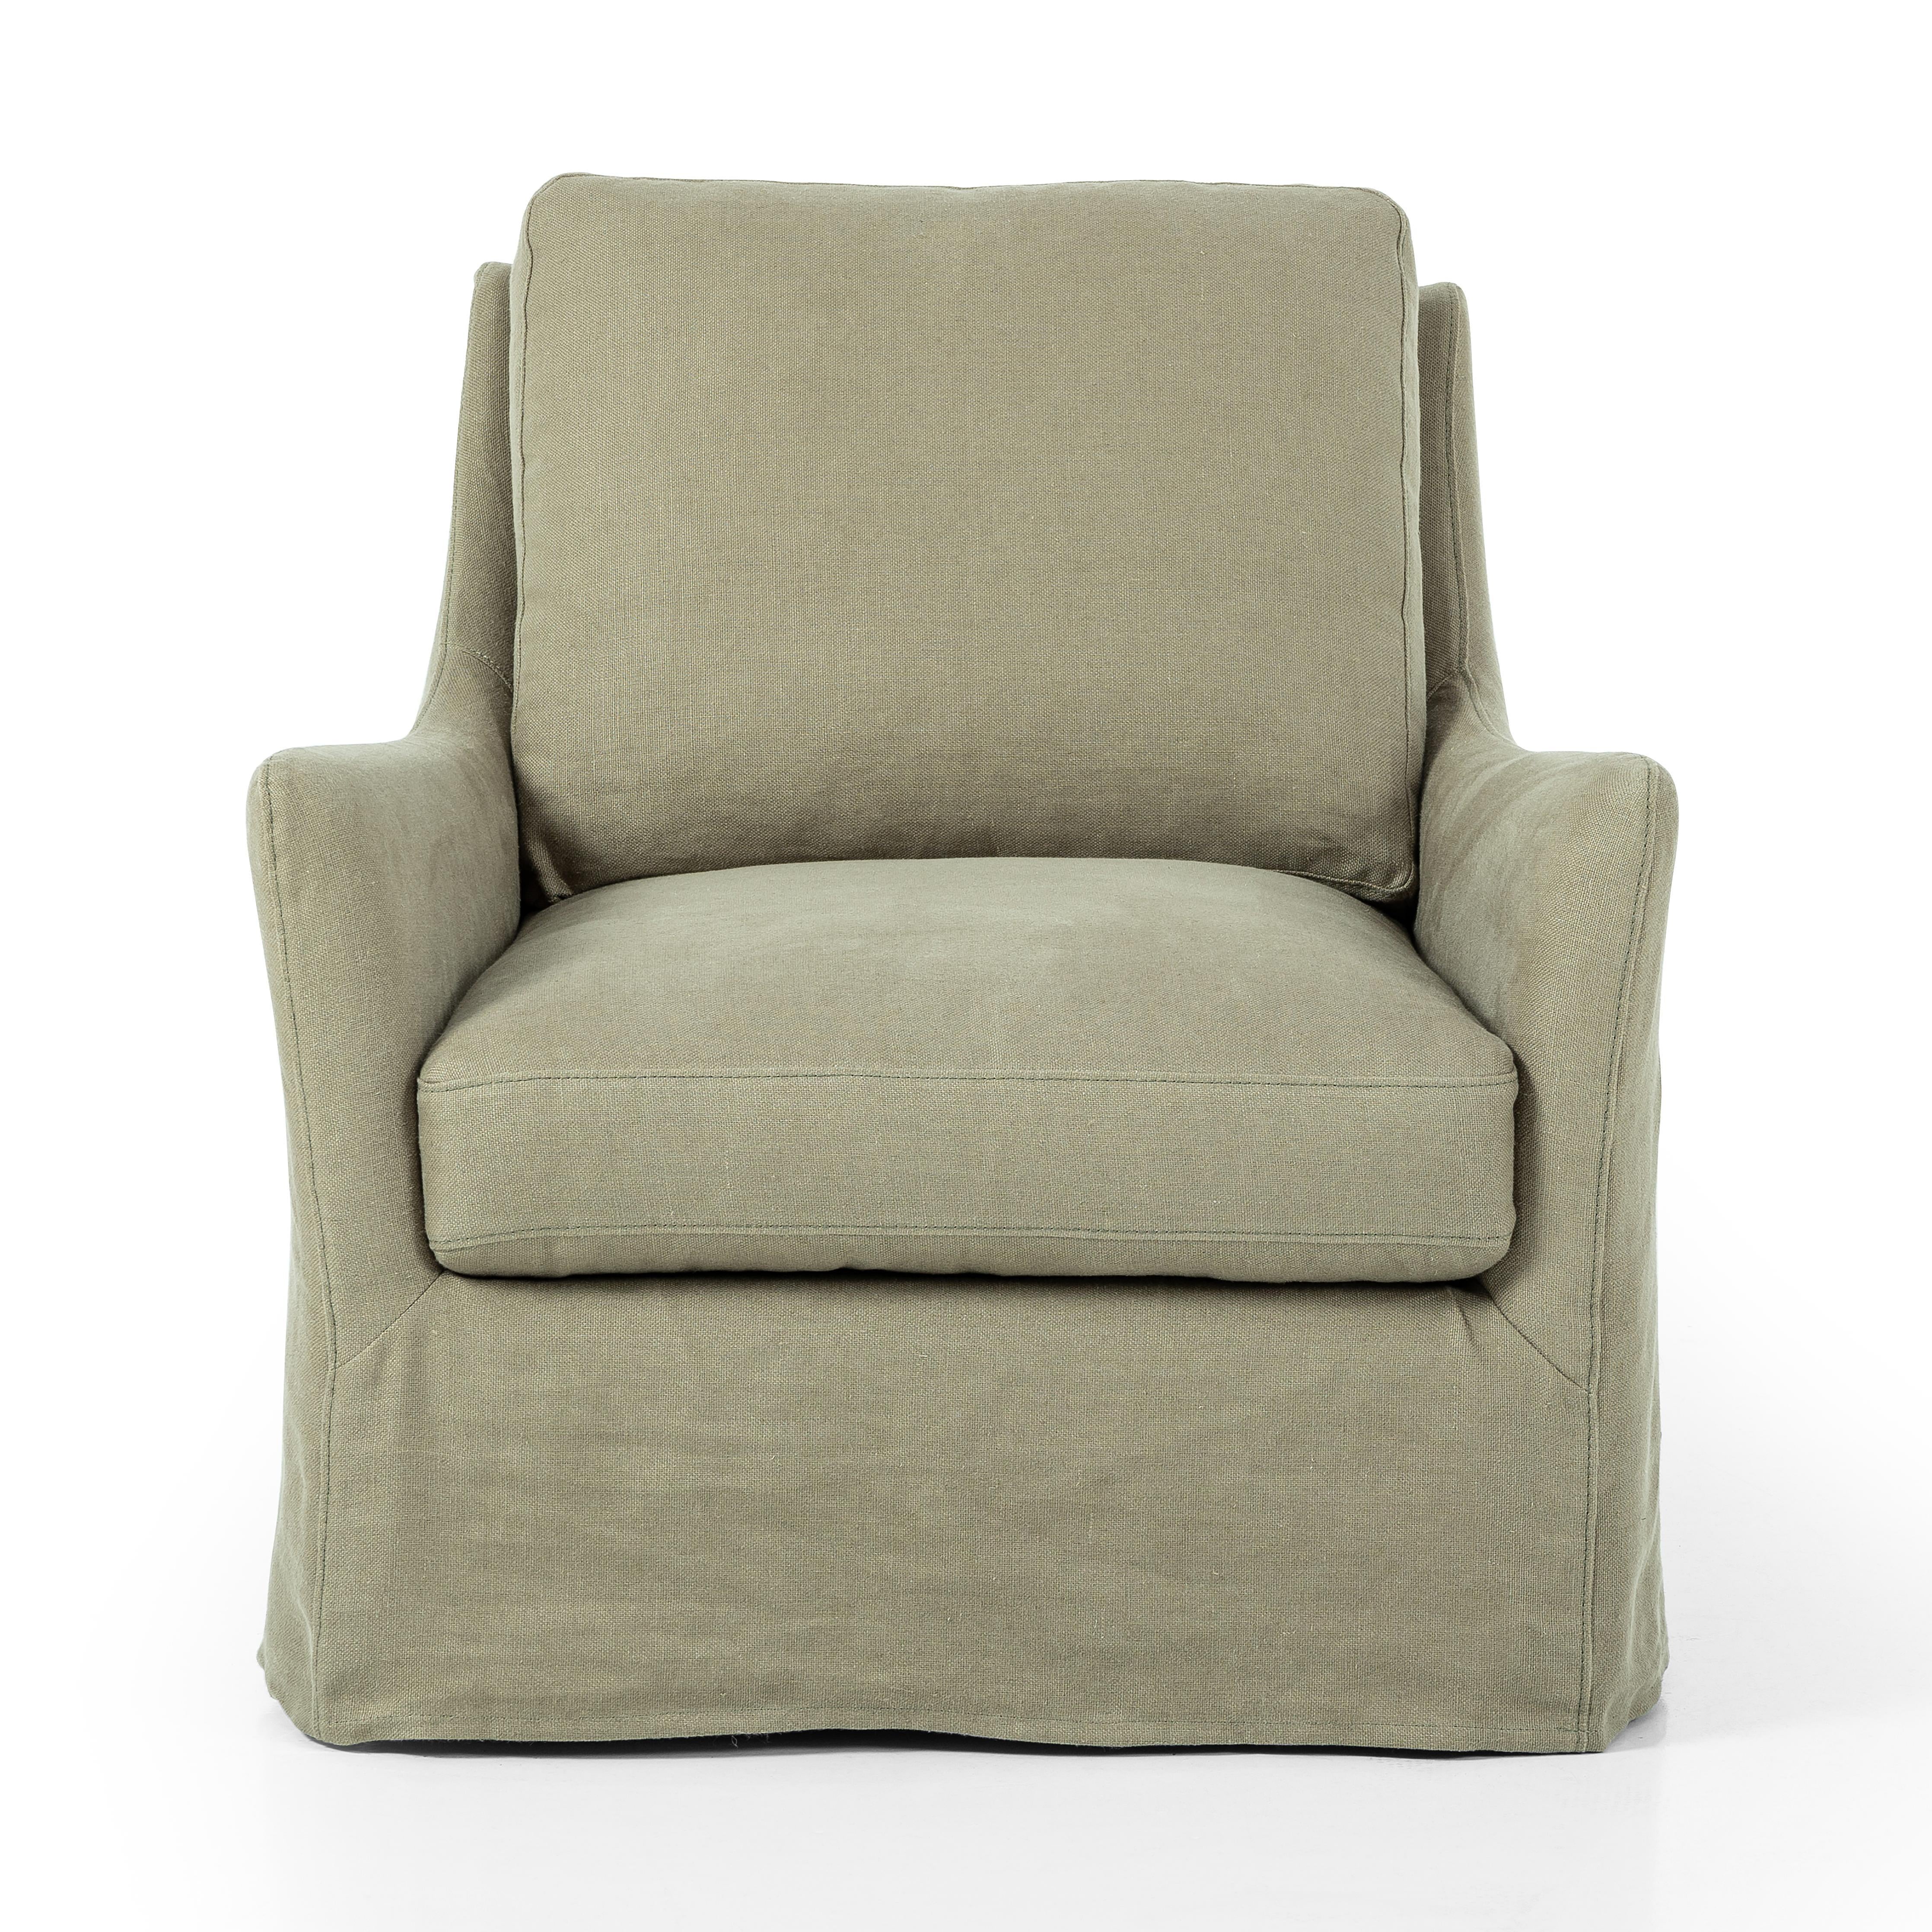 This 360-degree swivel chair is defined by slightly sloping, flared arms and a floor-length slipcover. Finished in a soft, tight weave slipcover for a traditional style. Durable and soft to the touch, Libeco™-sourced linens are artisan-made and free of toxic chemicals. Slipcovered styles are fully removable and machine-washable for easy care. Amethyst Home provides interior design, new home construction design consulting, vintage area rugs, and lighting in the Kansas City metro area.